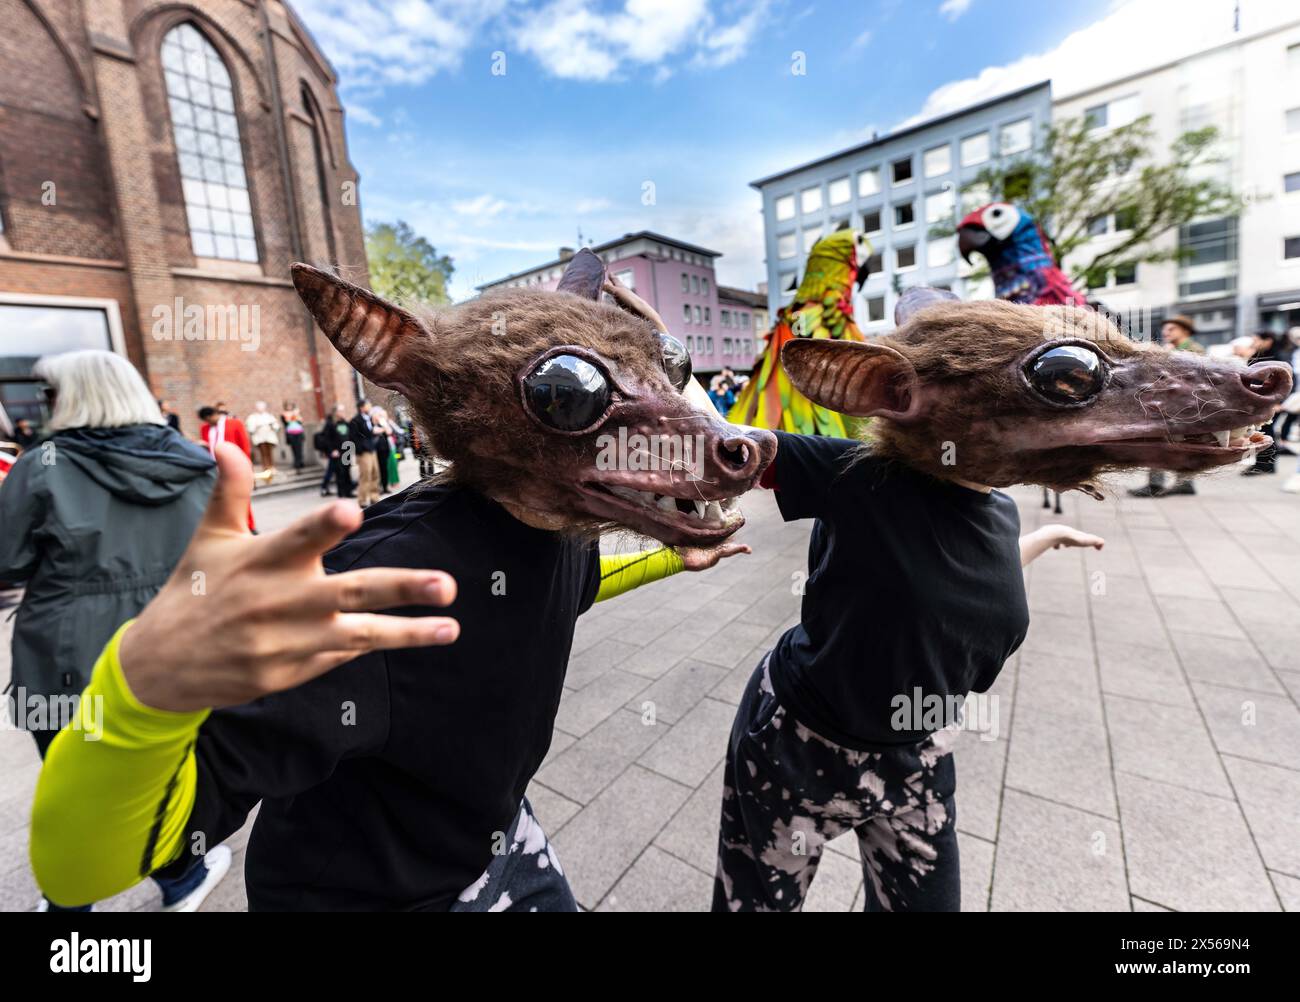 Bochum, Germany. 07th May, 2024. Disguised people in action at the opening of the Fidena puppet theater festival. The puppet theater festival opened with a parade of oversized insects and strange creatures. International puppet theater makers showcase contemporary puppetry in Bochum, Herne, Recklinghausen and Dortmund. The parade aims to make a statement against the extinction of species. The festival offers 22 productions from ten countries, including three world premieres and five German premieres. Credit: Dieter Menne/dpa/Alamy Live News Stock Photo